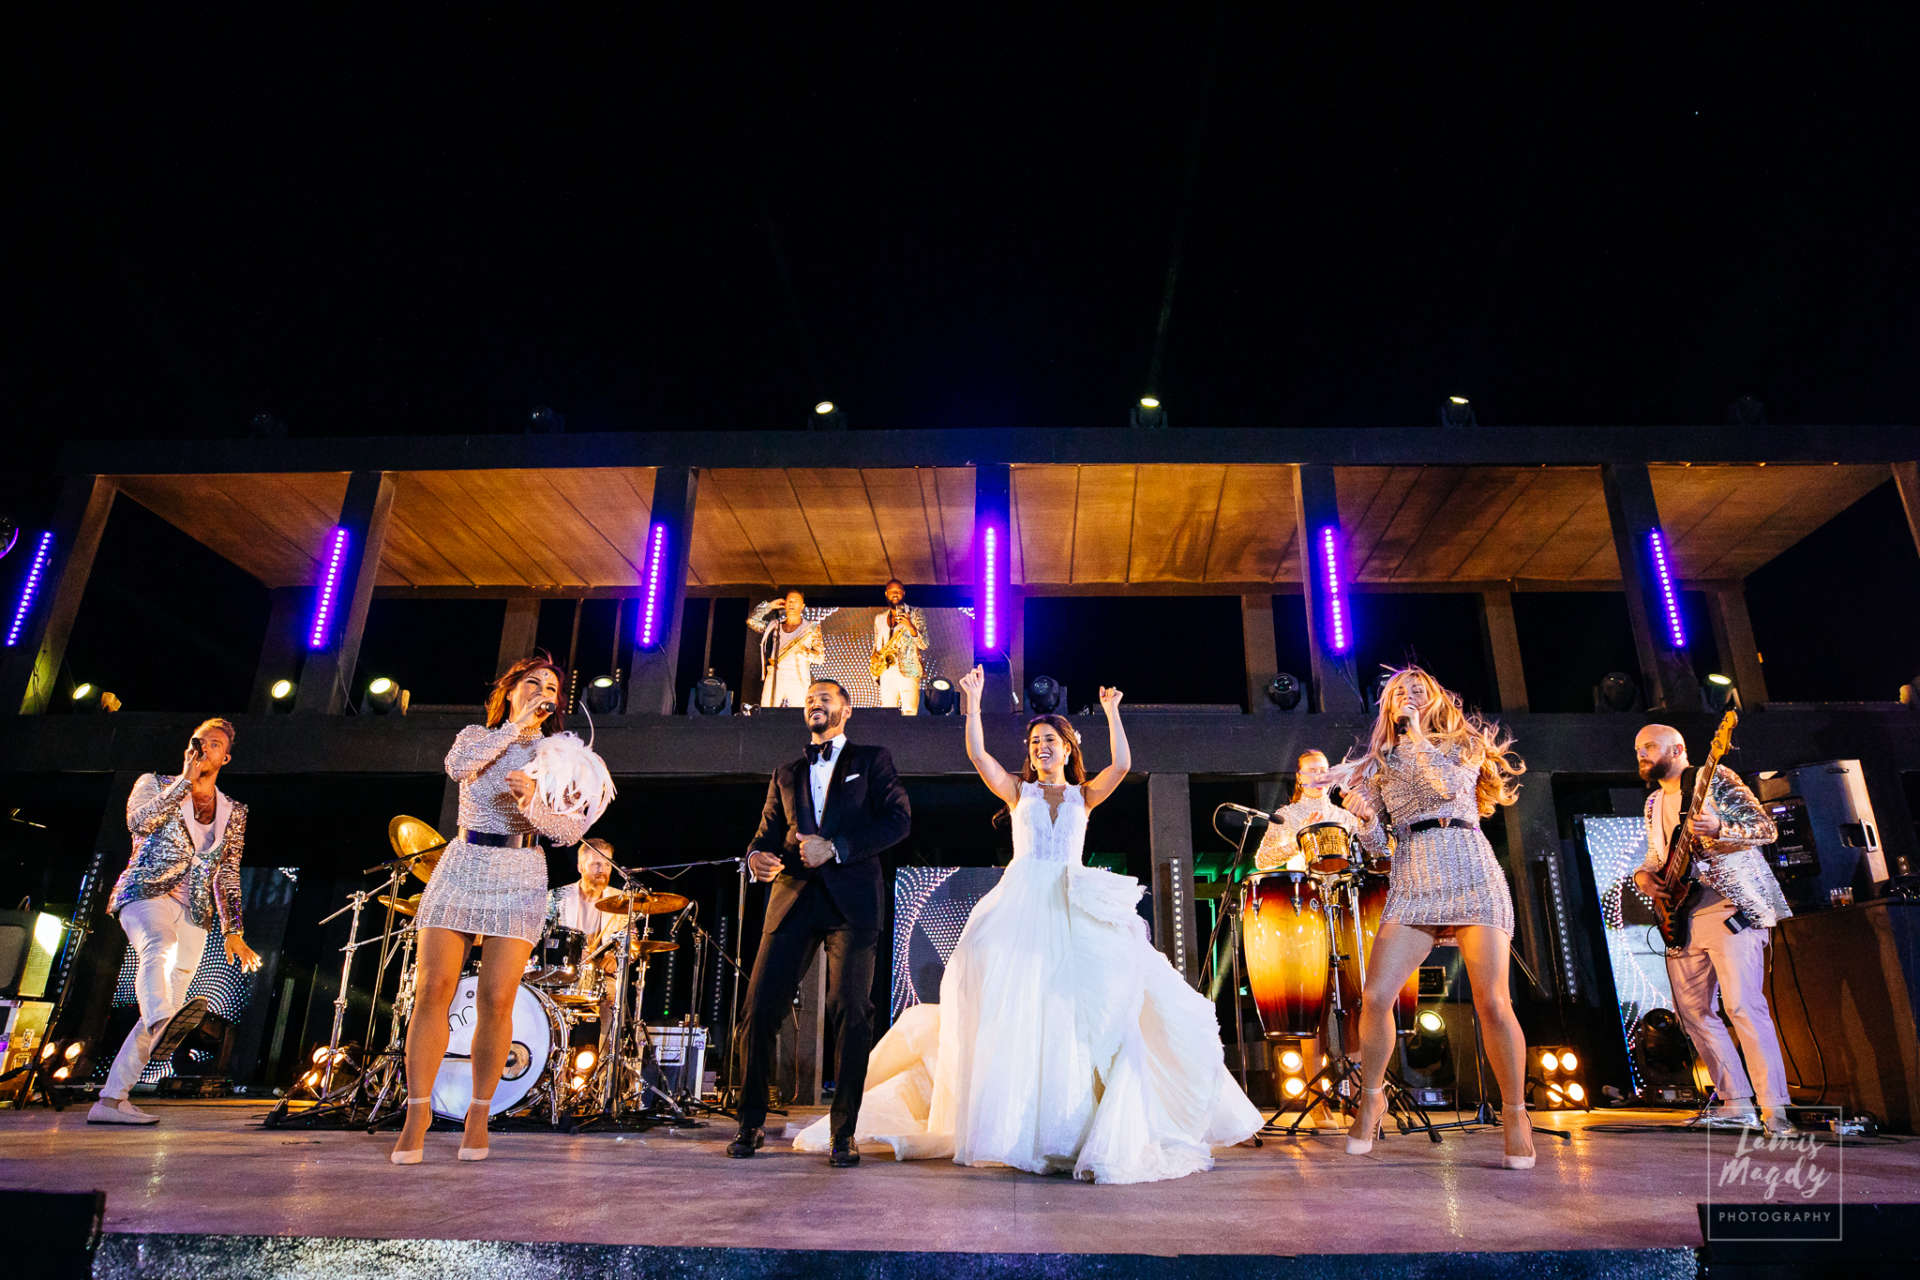 iPop Best Wedding Band for hire in the UK